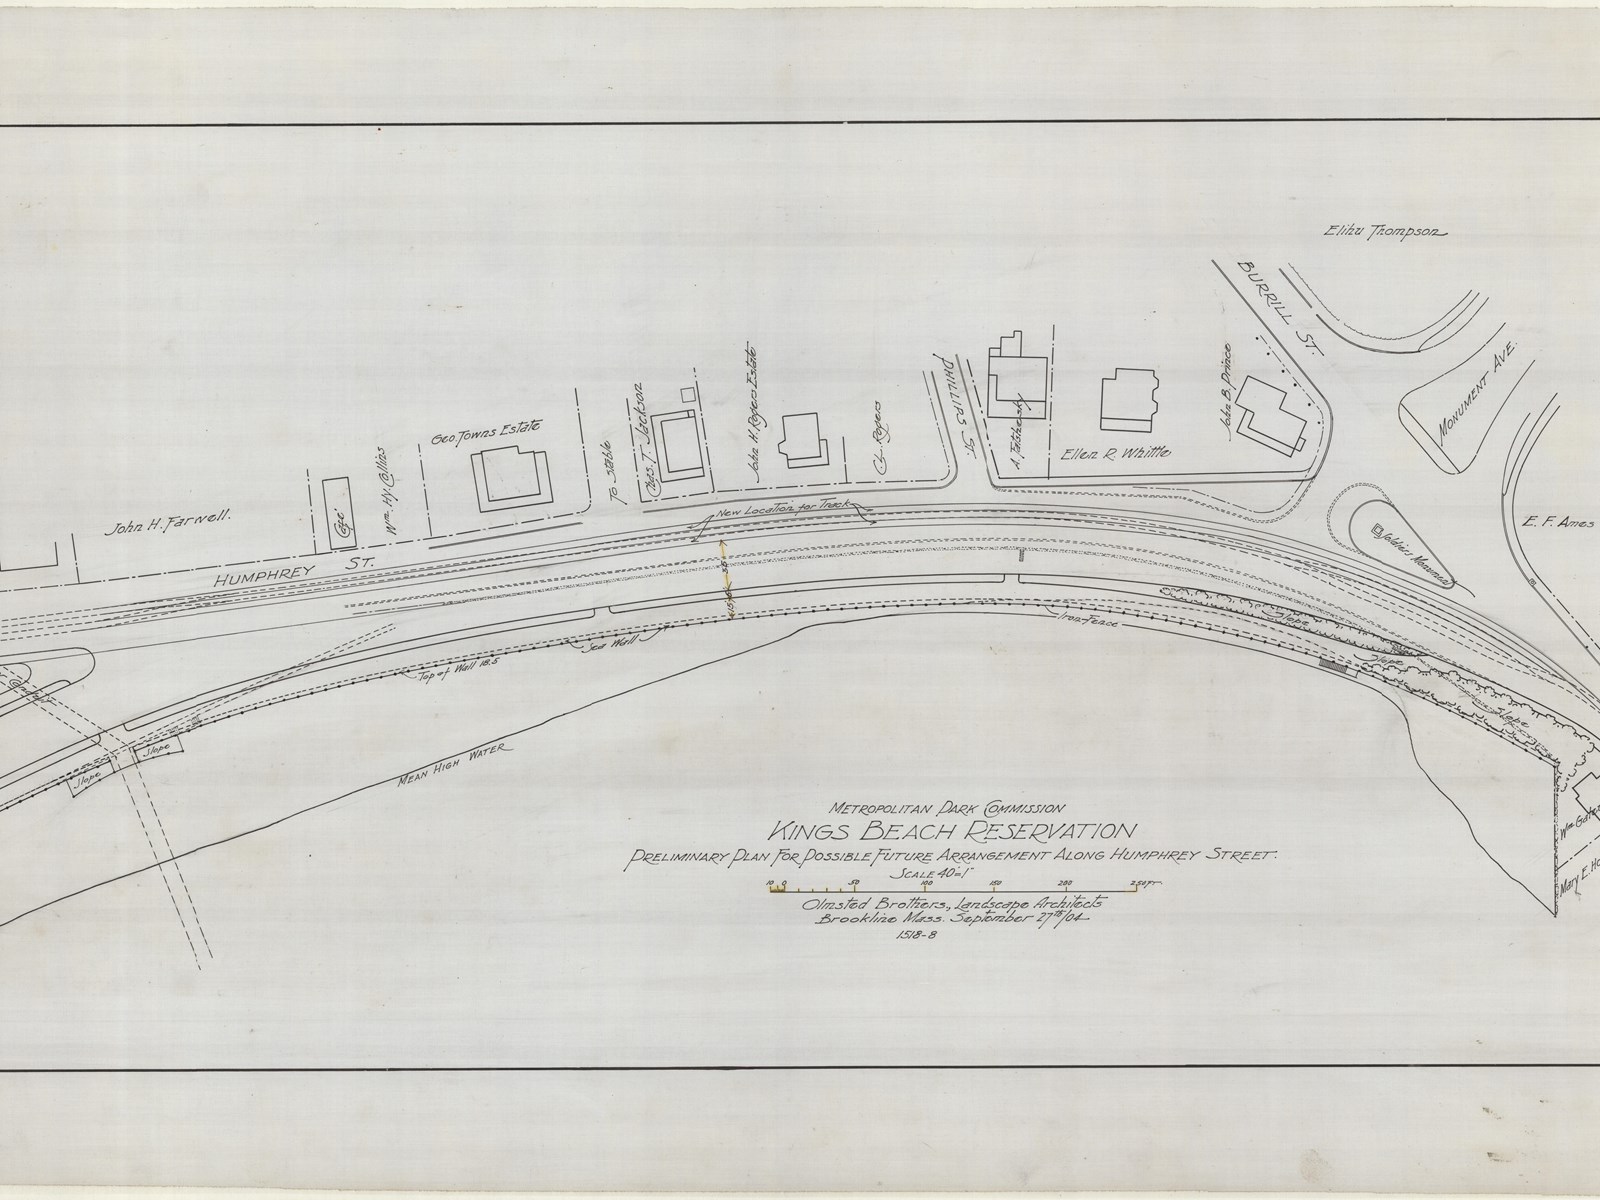 Plan of road with buildings on one side, ocean on the other